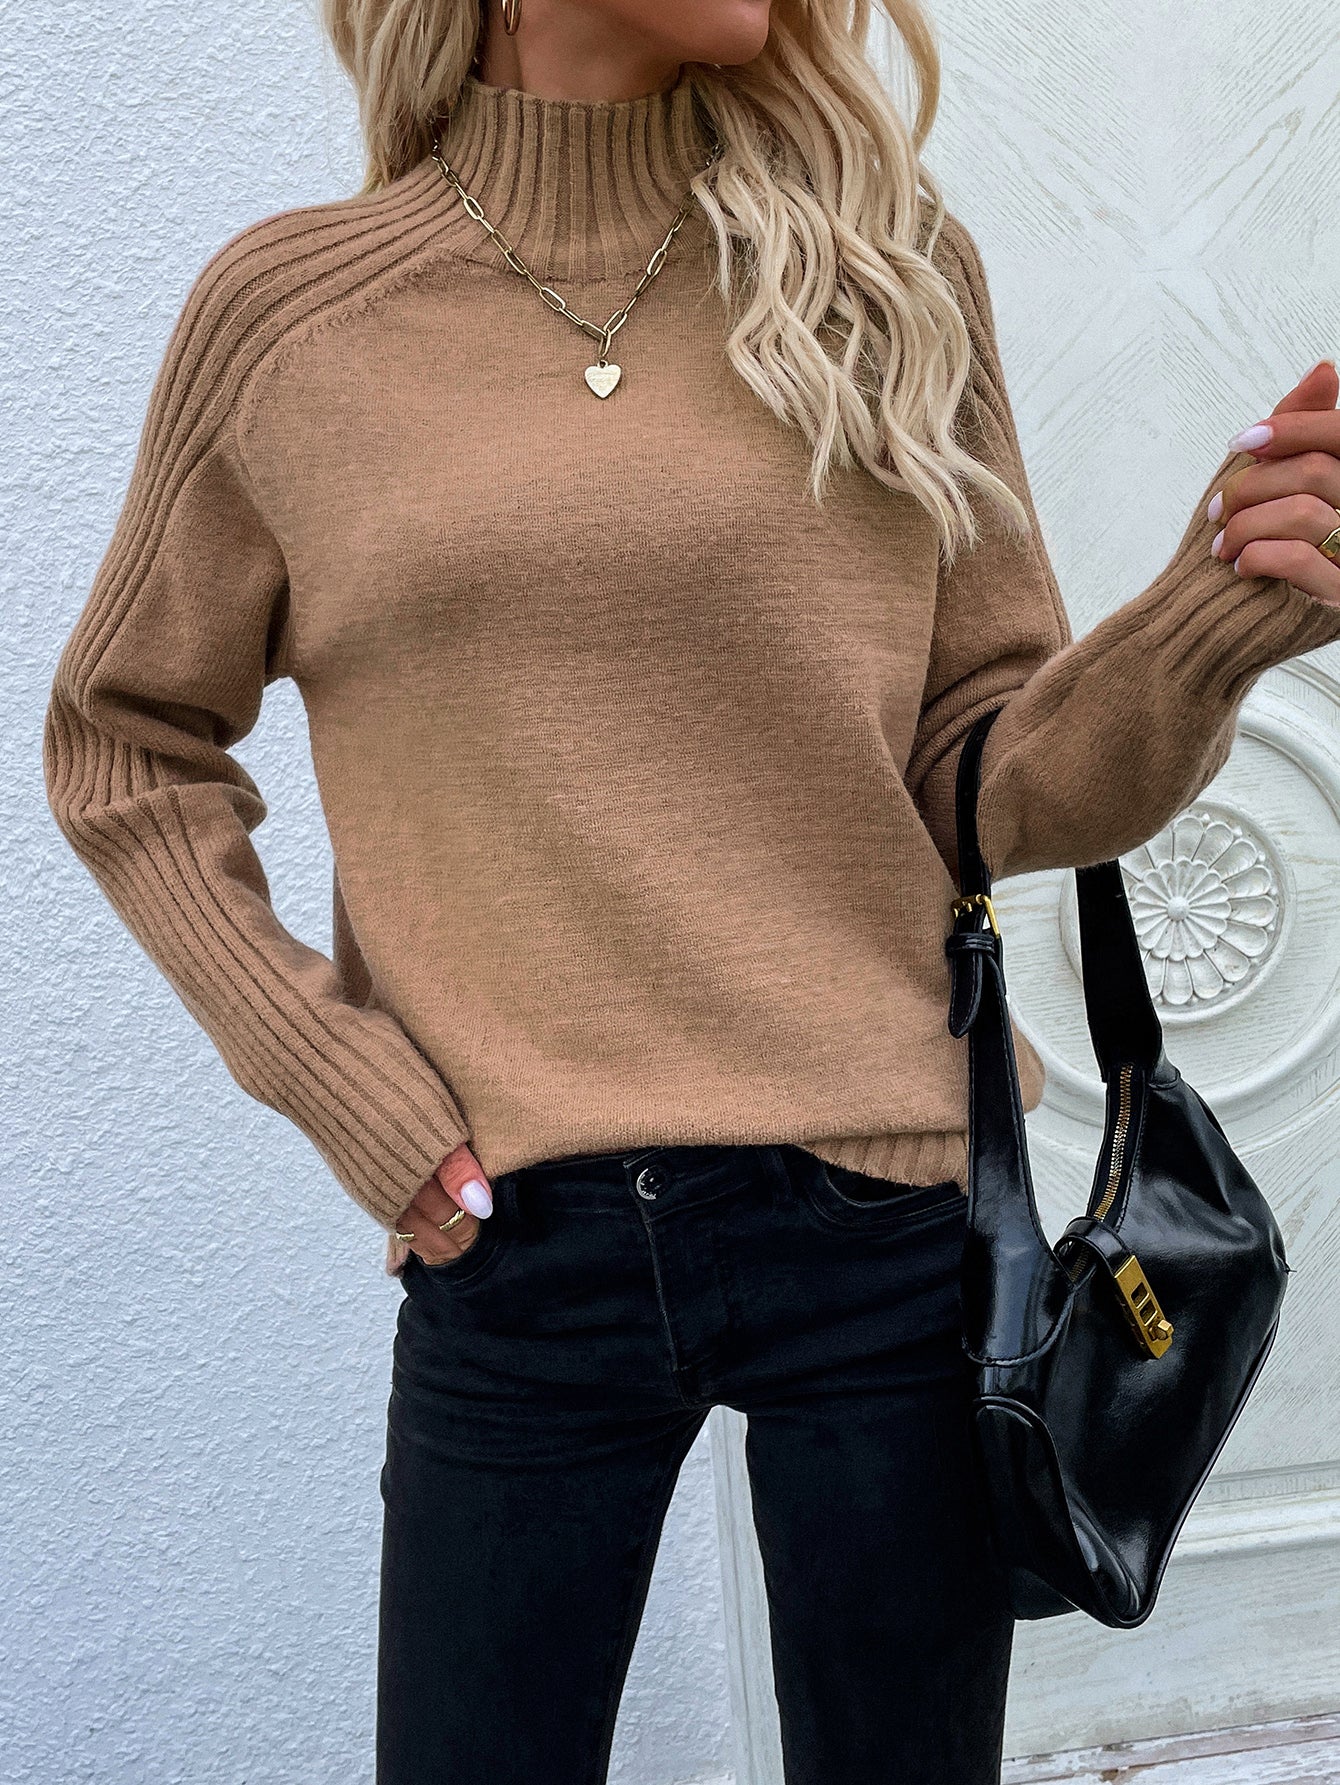 Autumn Winter New Solid Color Sweater Turtleneck Pullover Loose Women Clothing Solid Color Autumn Winter Turtleneck Sweater